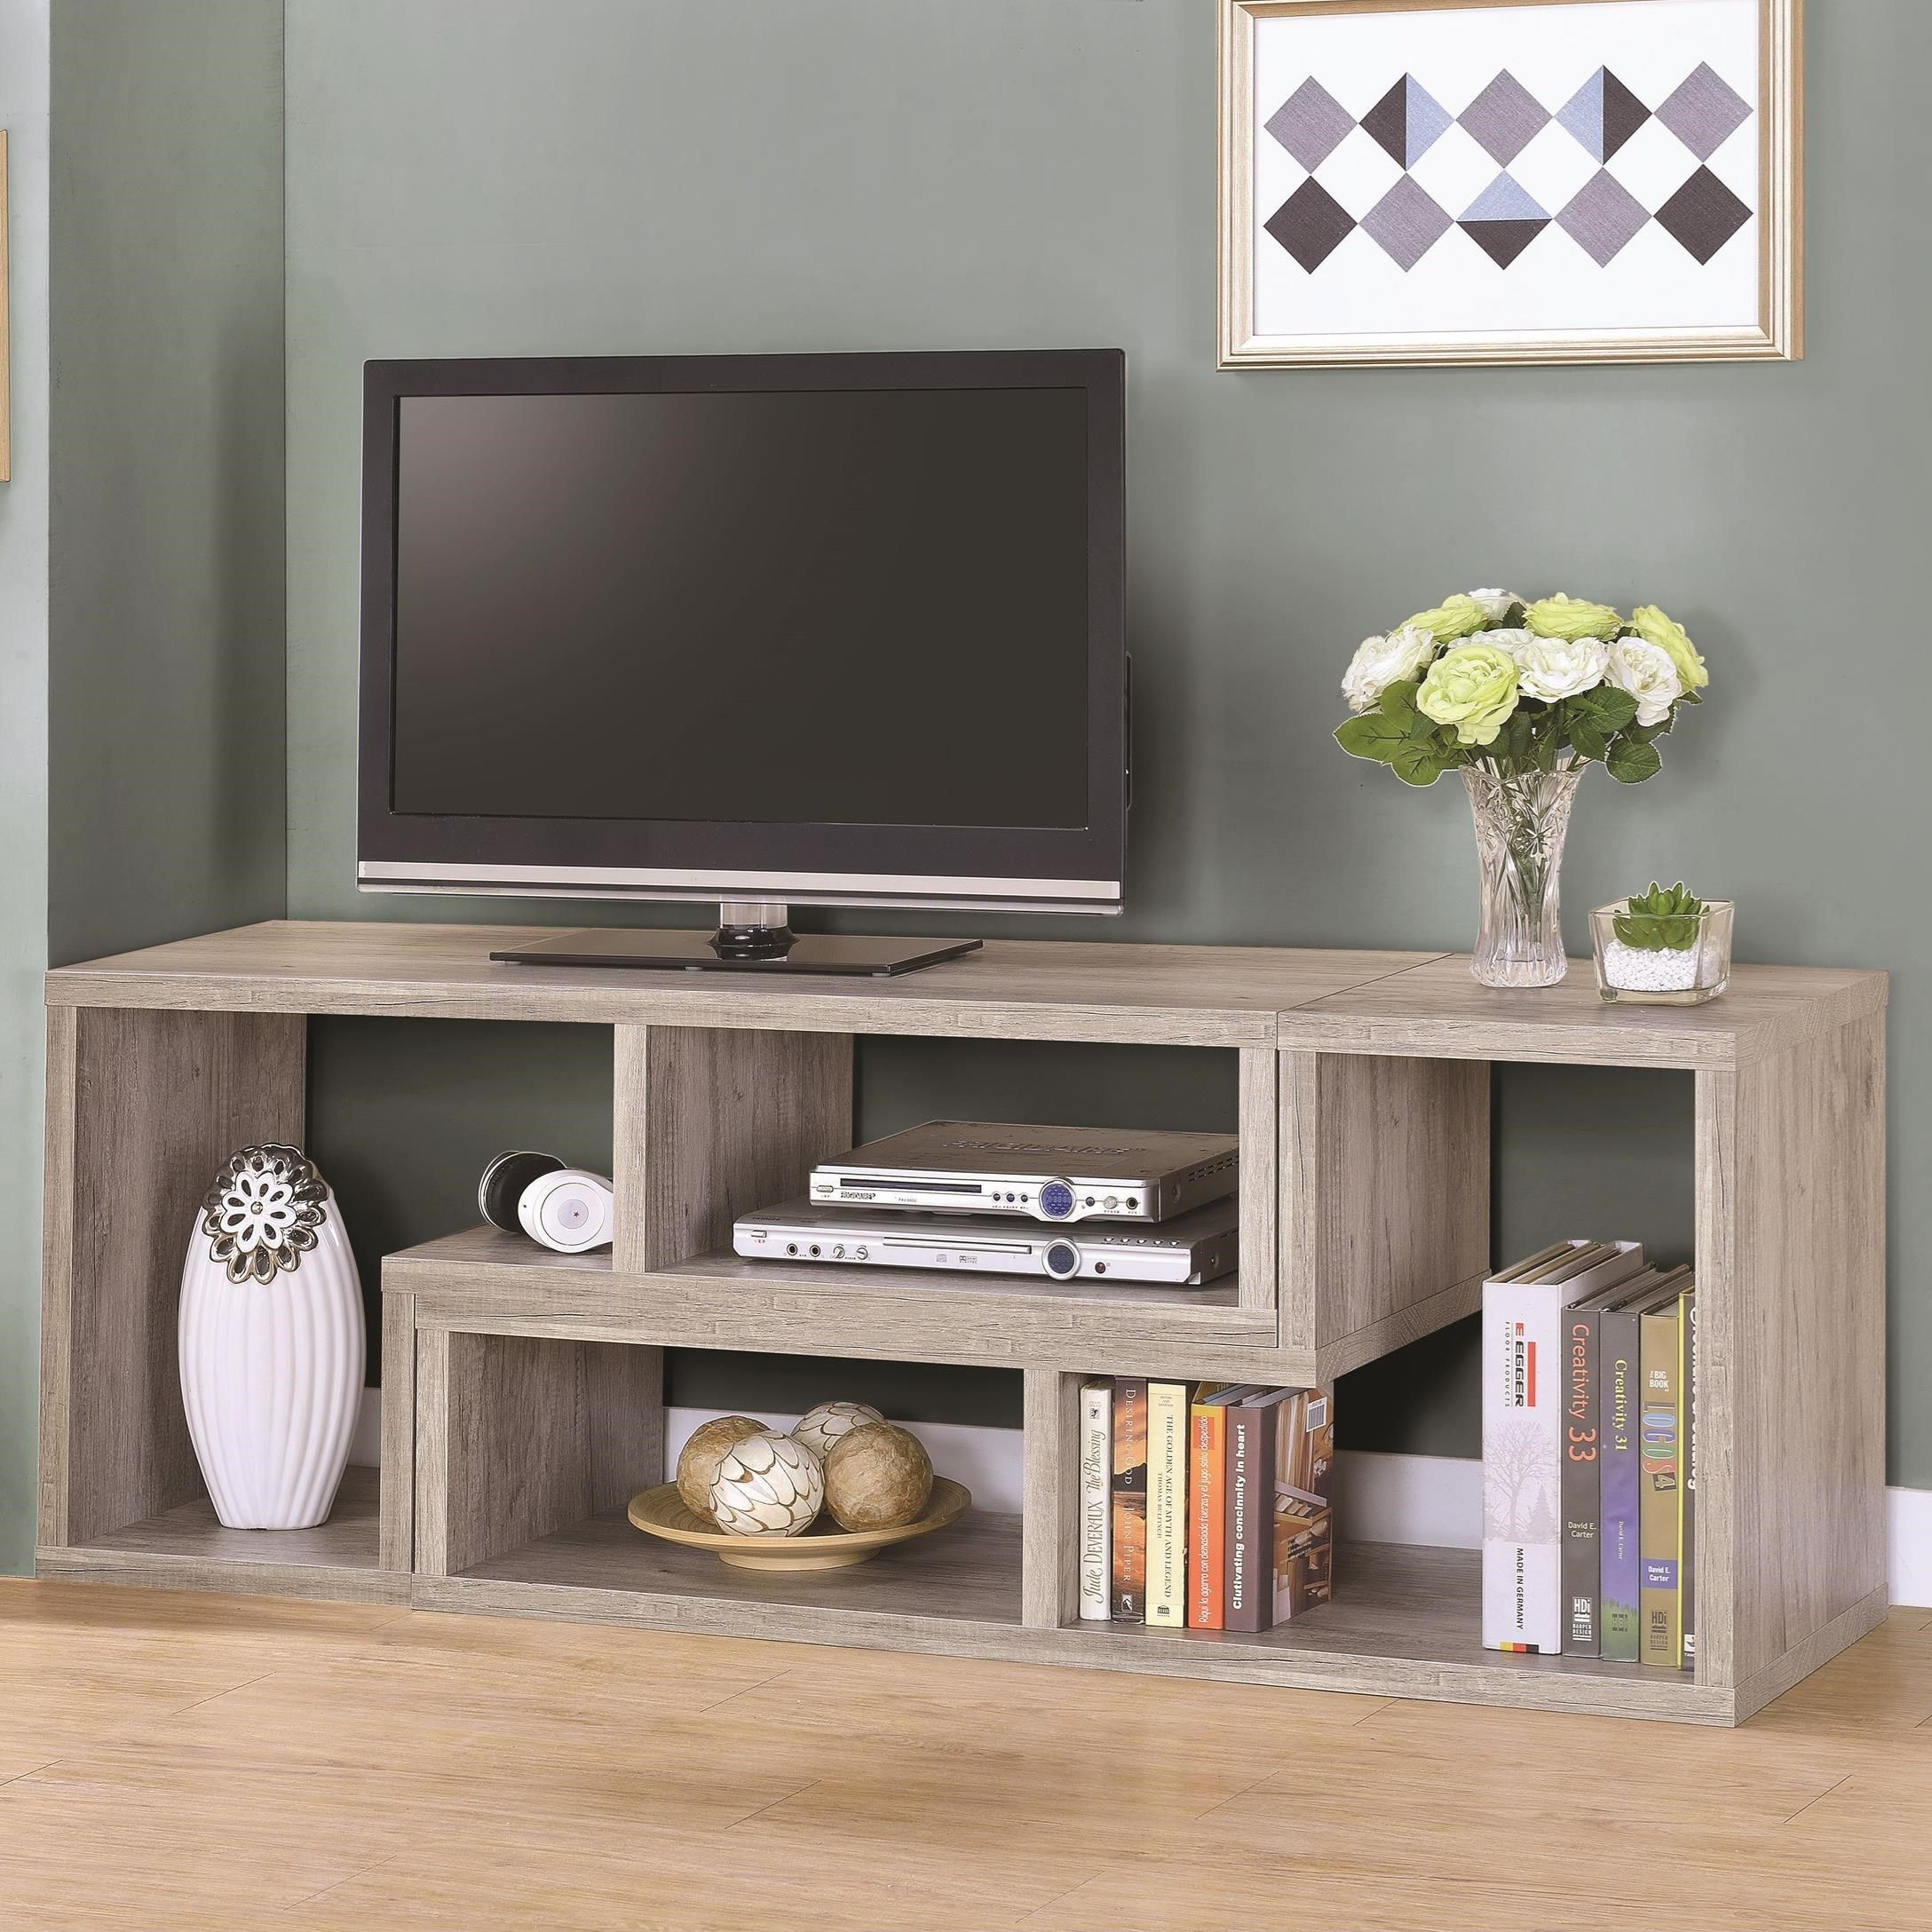 Coaster Tv Stands Convertible Tv Console And Bookcase Intended For Bookshelf Tv Stands Combo (View 12 of 15)